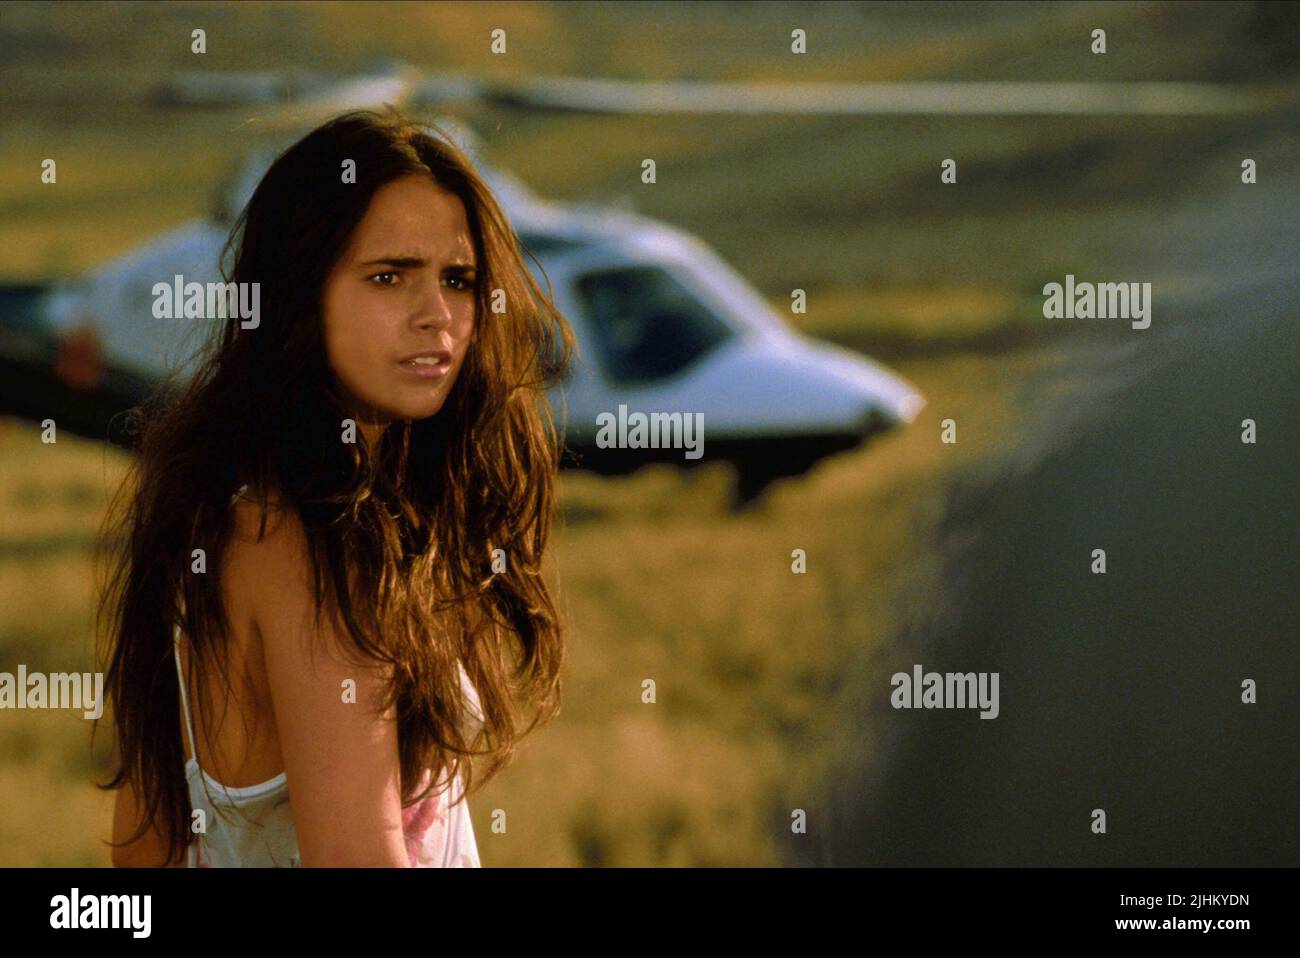 JORDANA BREWSTER, The Fast and the Furious, 2001 Stockfoto